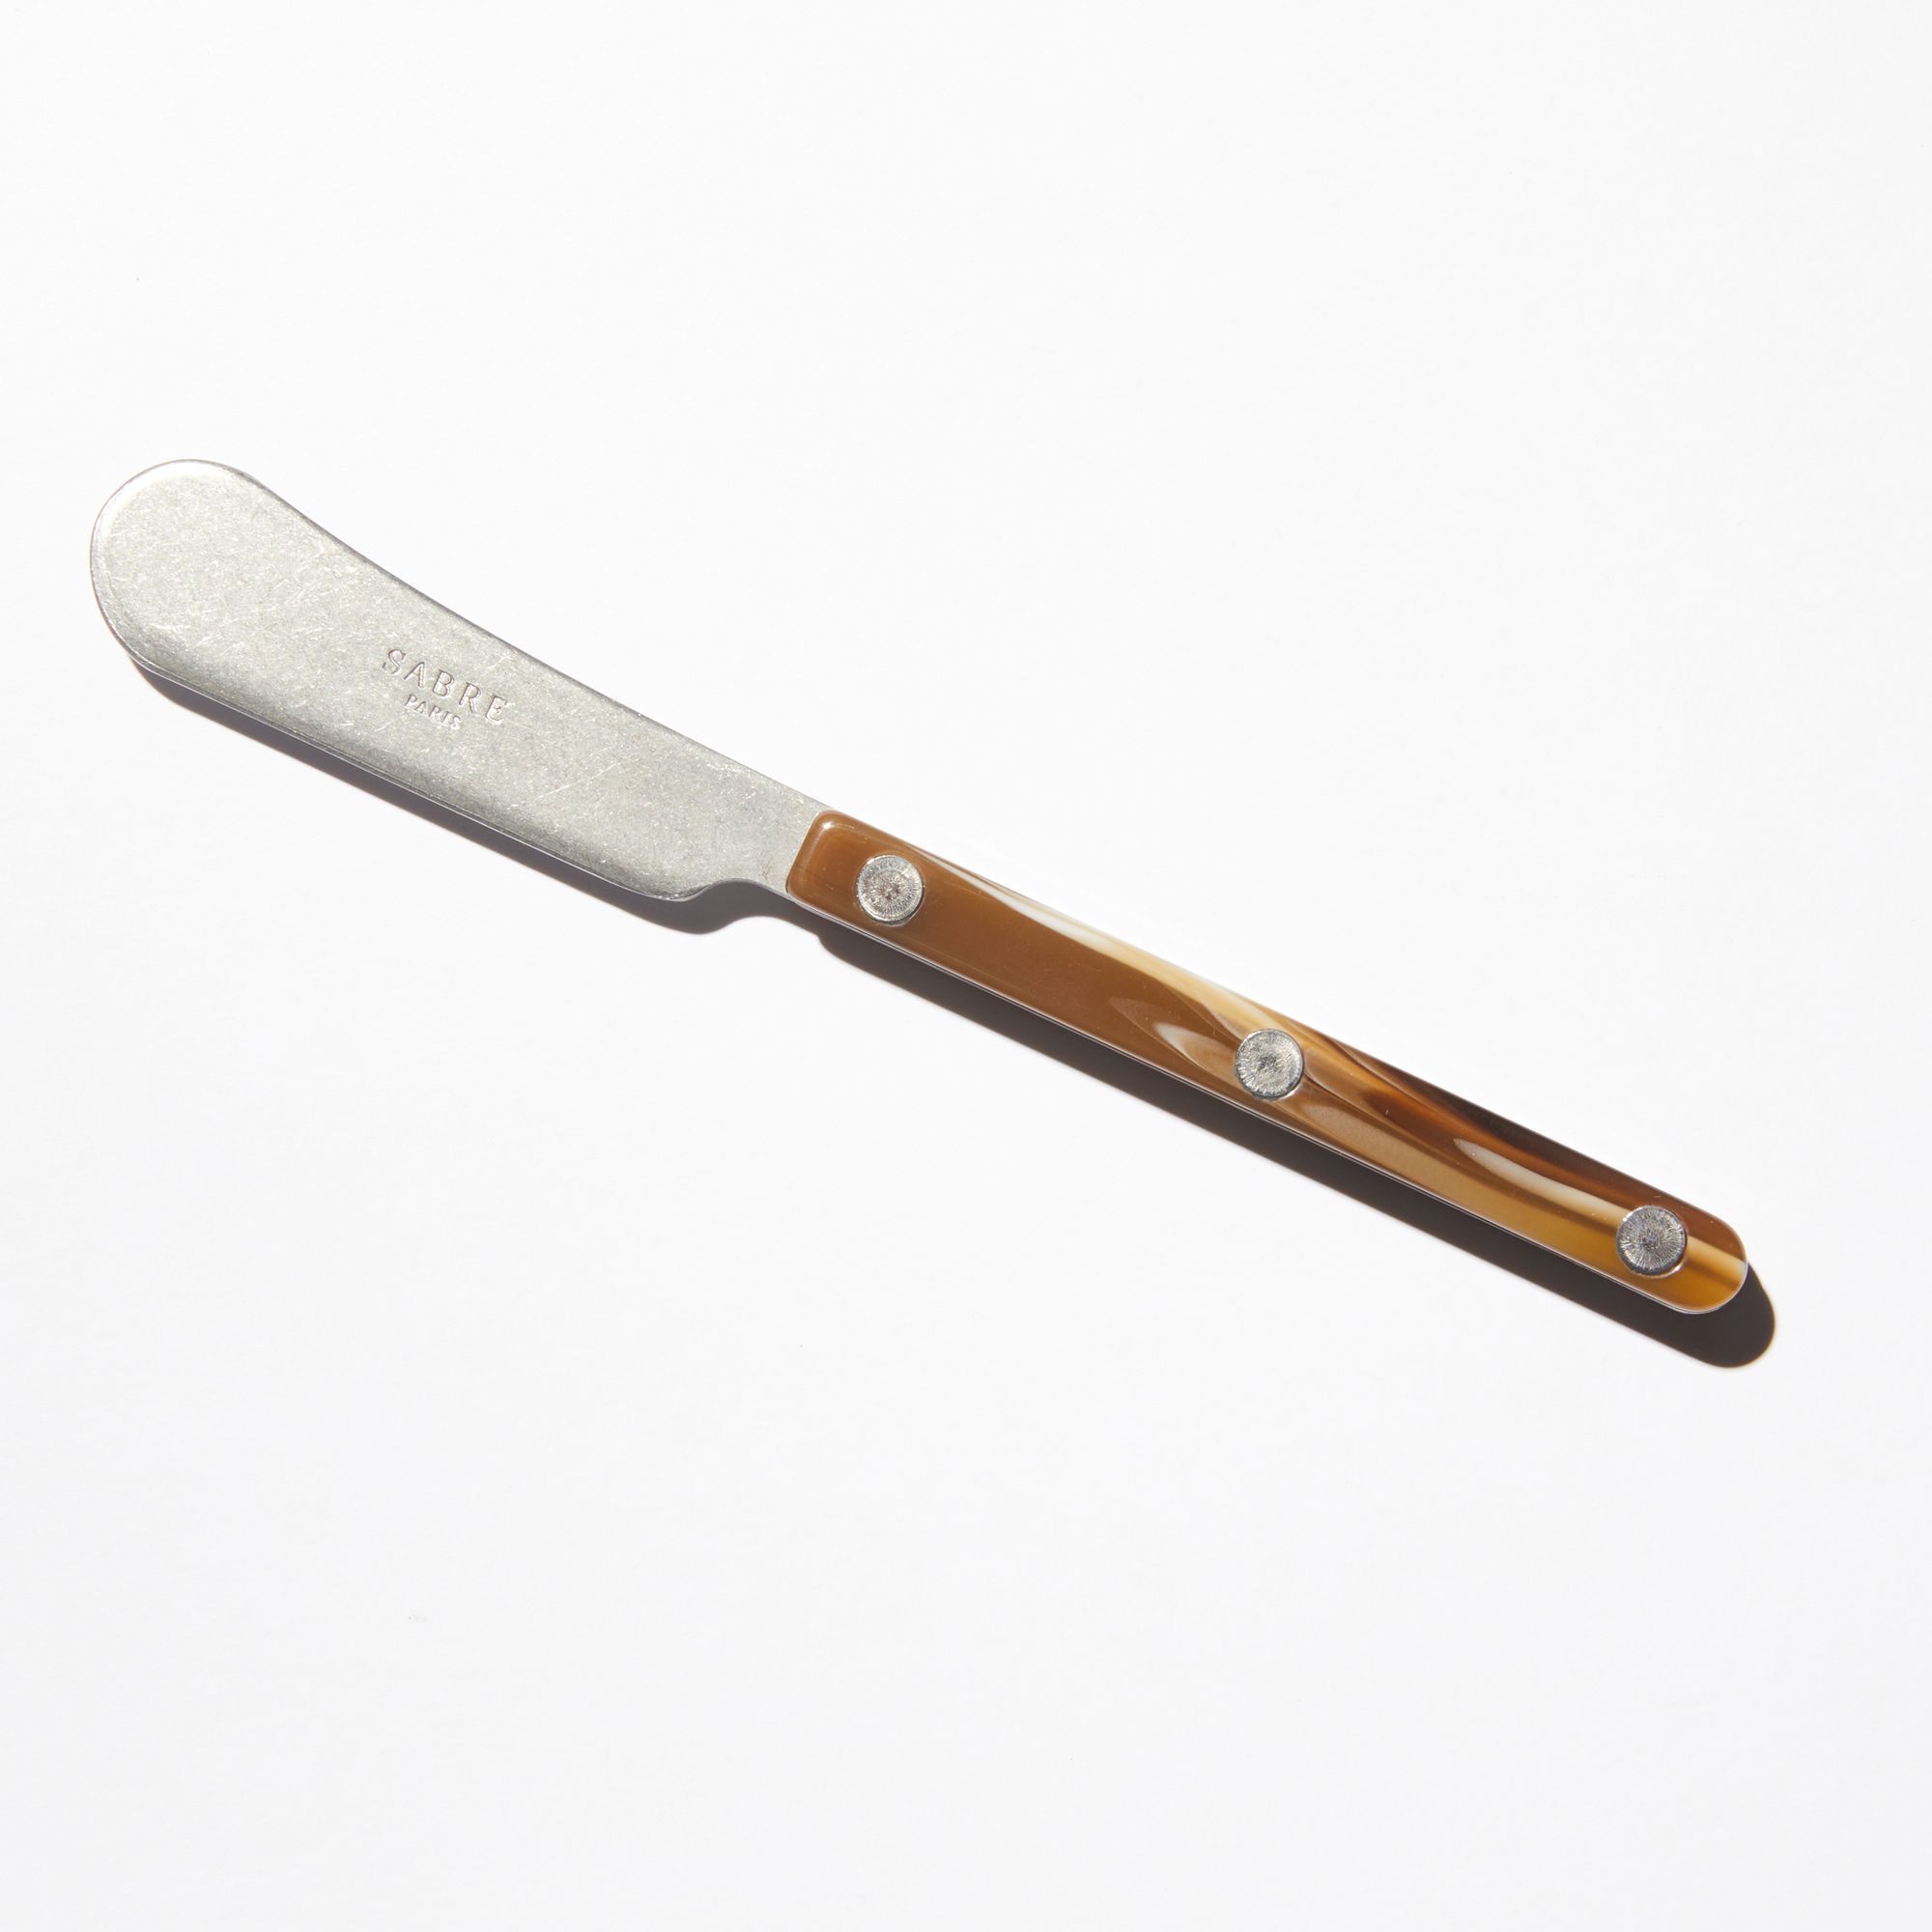 A cheese knife with a short blade that gets wider at the end. Has a matte acrylic handle.